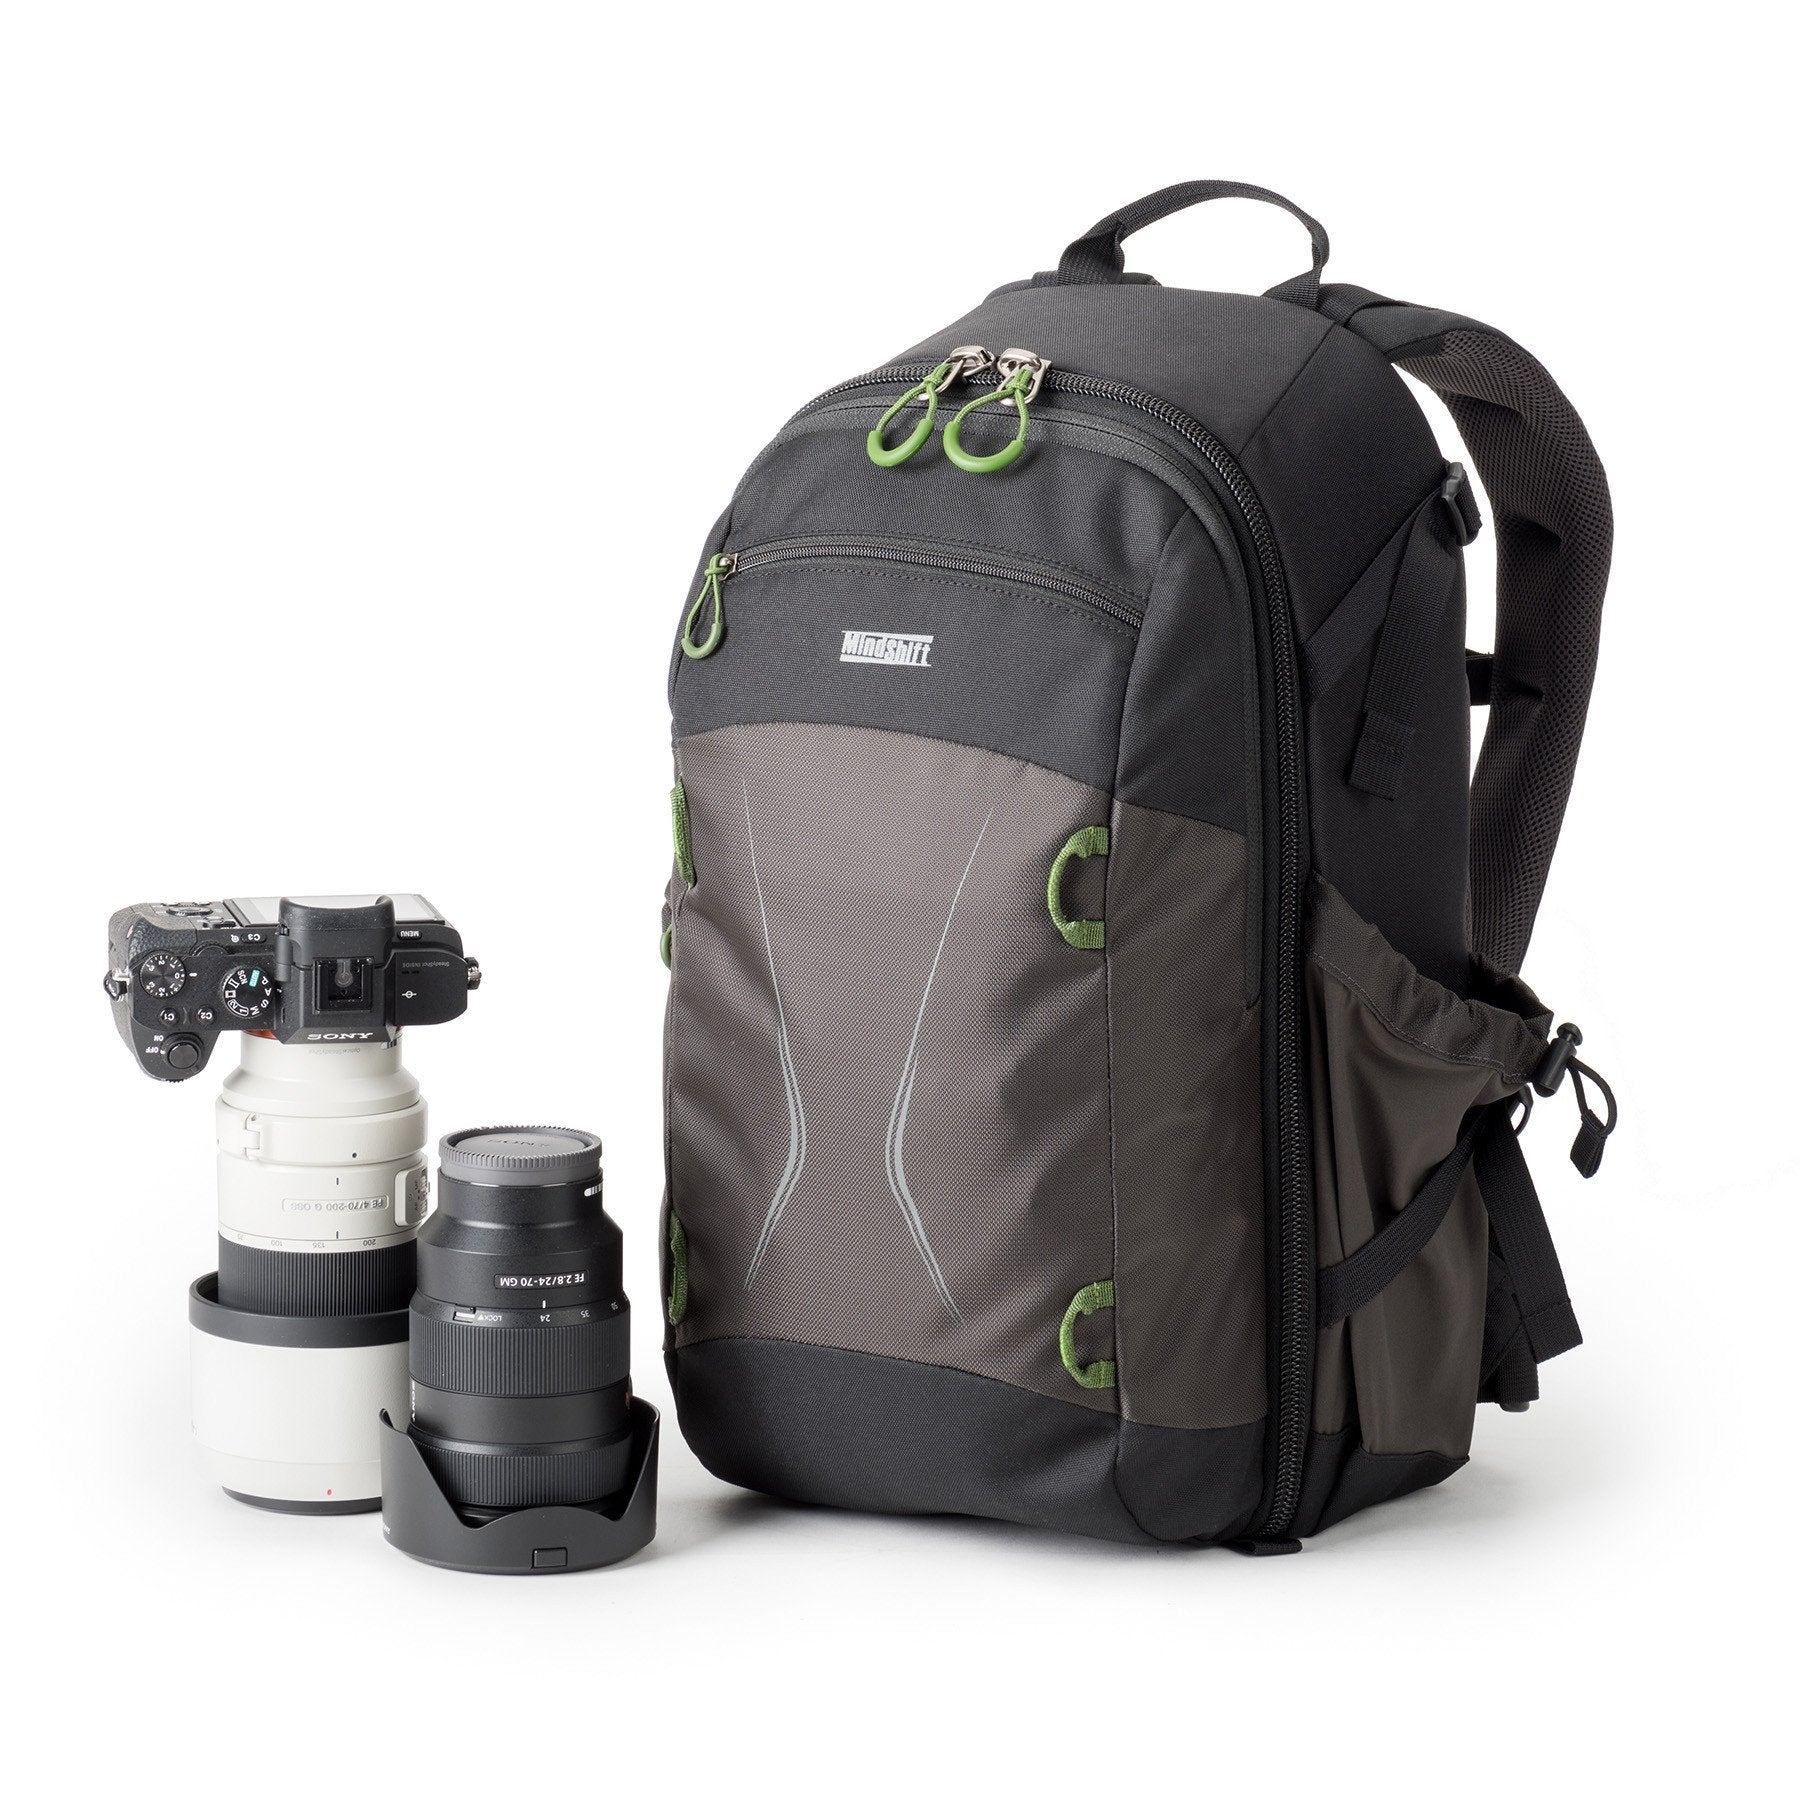 MindShift TrailScape 18L - The TrailScape offers a spacious interior, allowing for plenty of photo gear, yet maintains a slim and compact profile.